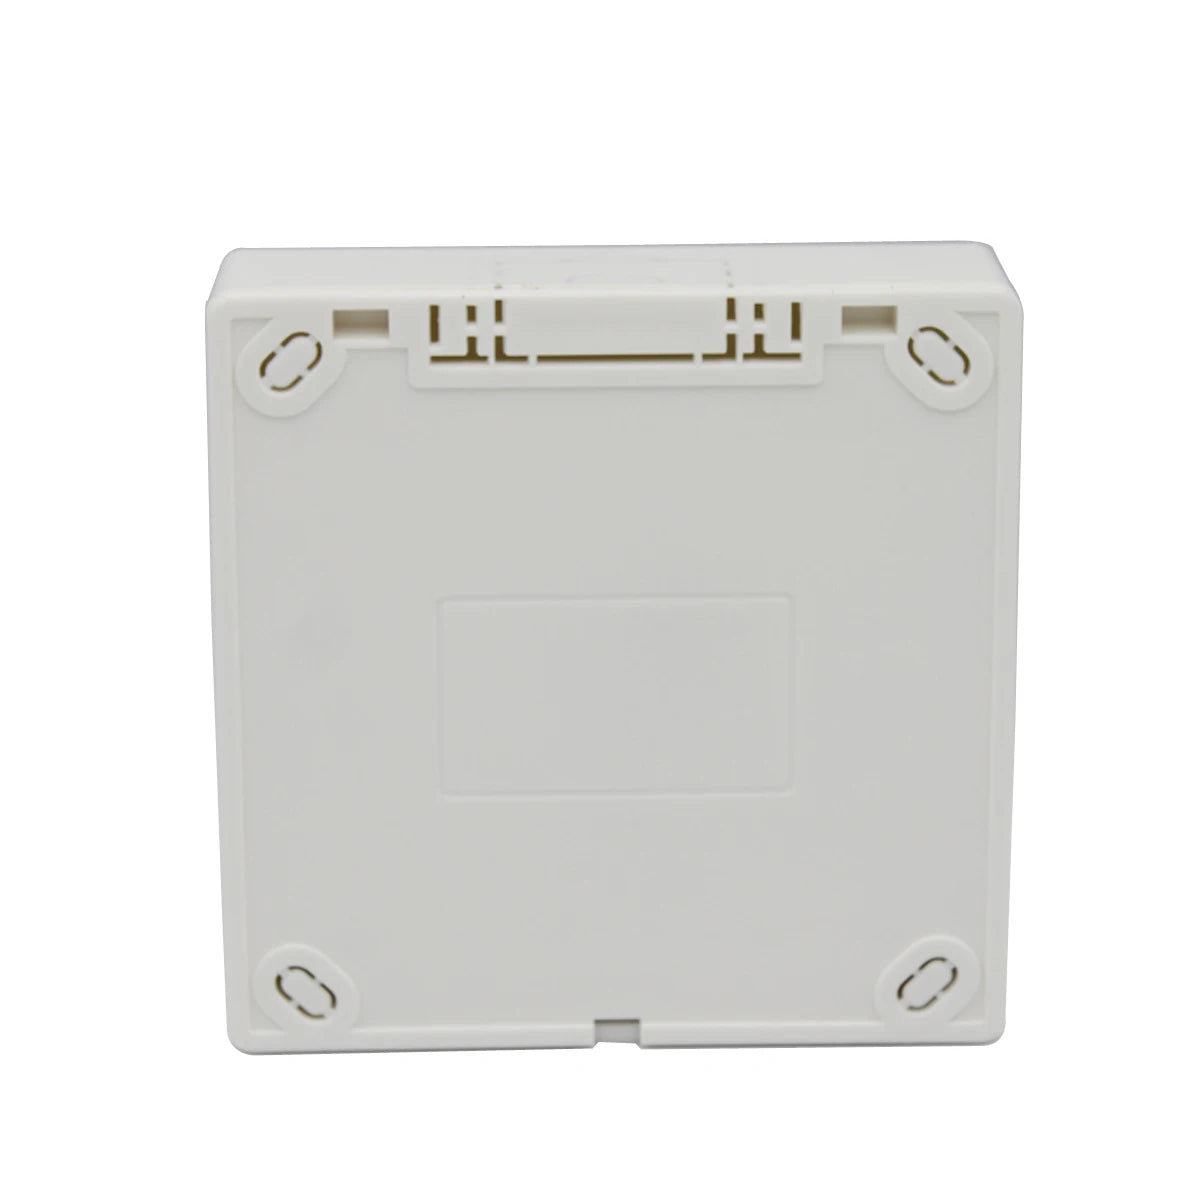 86*86mm DC 12V Push Exit Release Switch with Button Box for Door Access Control System Plastic Panel Button